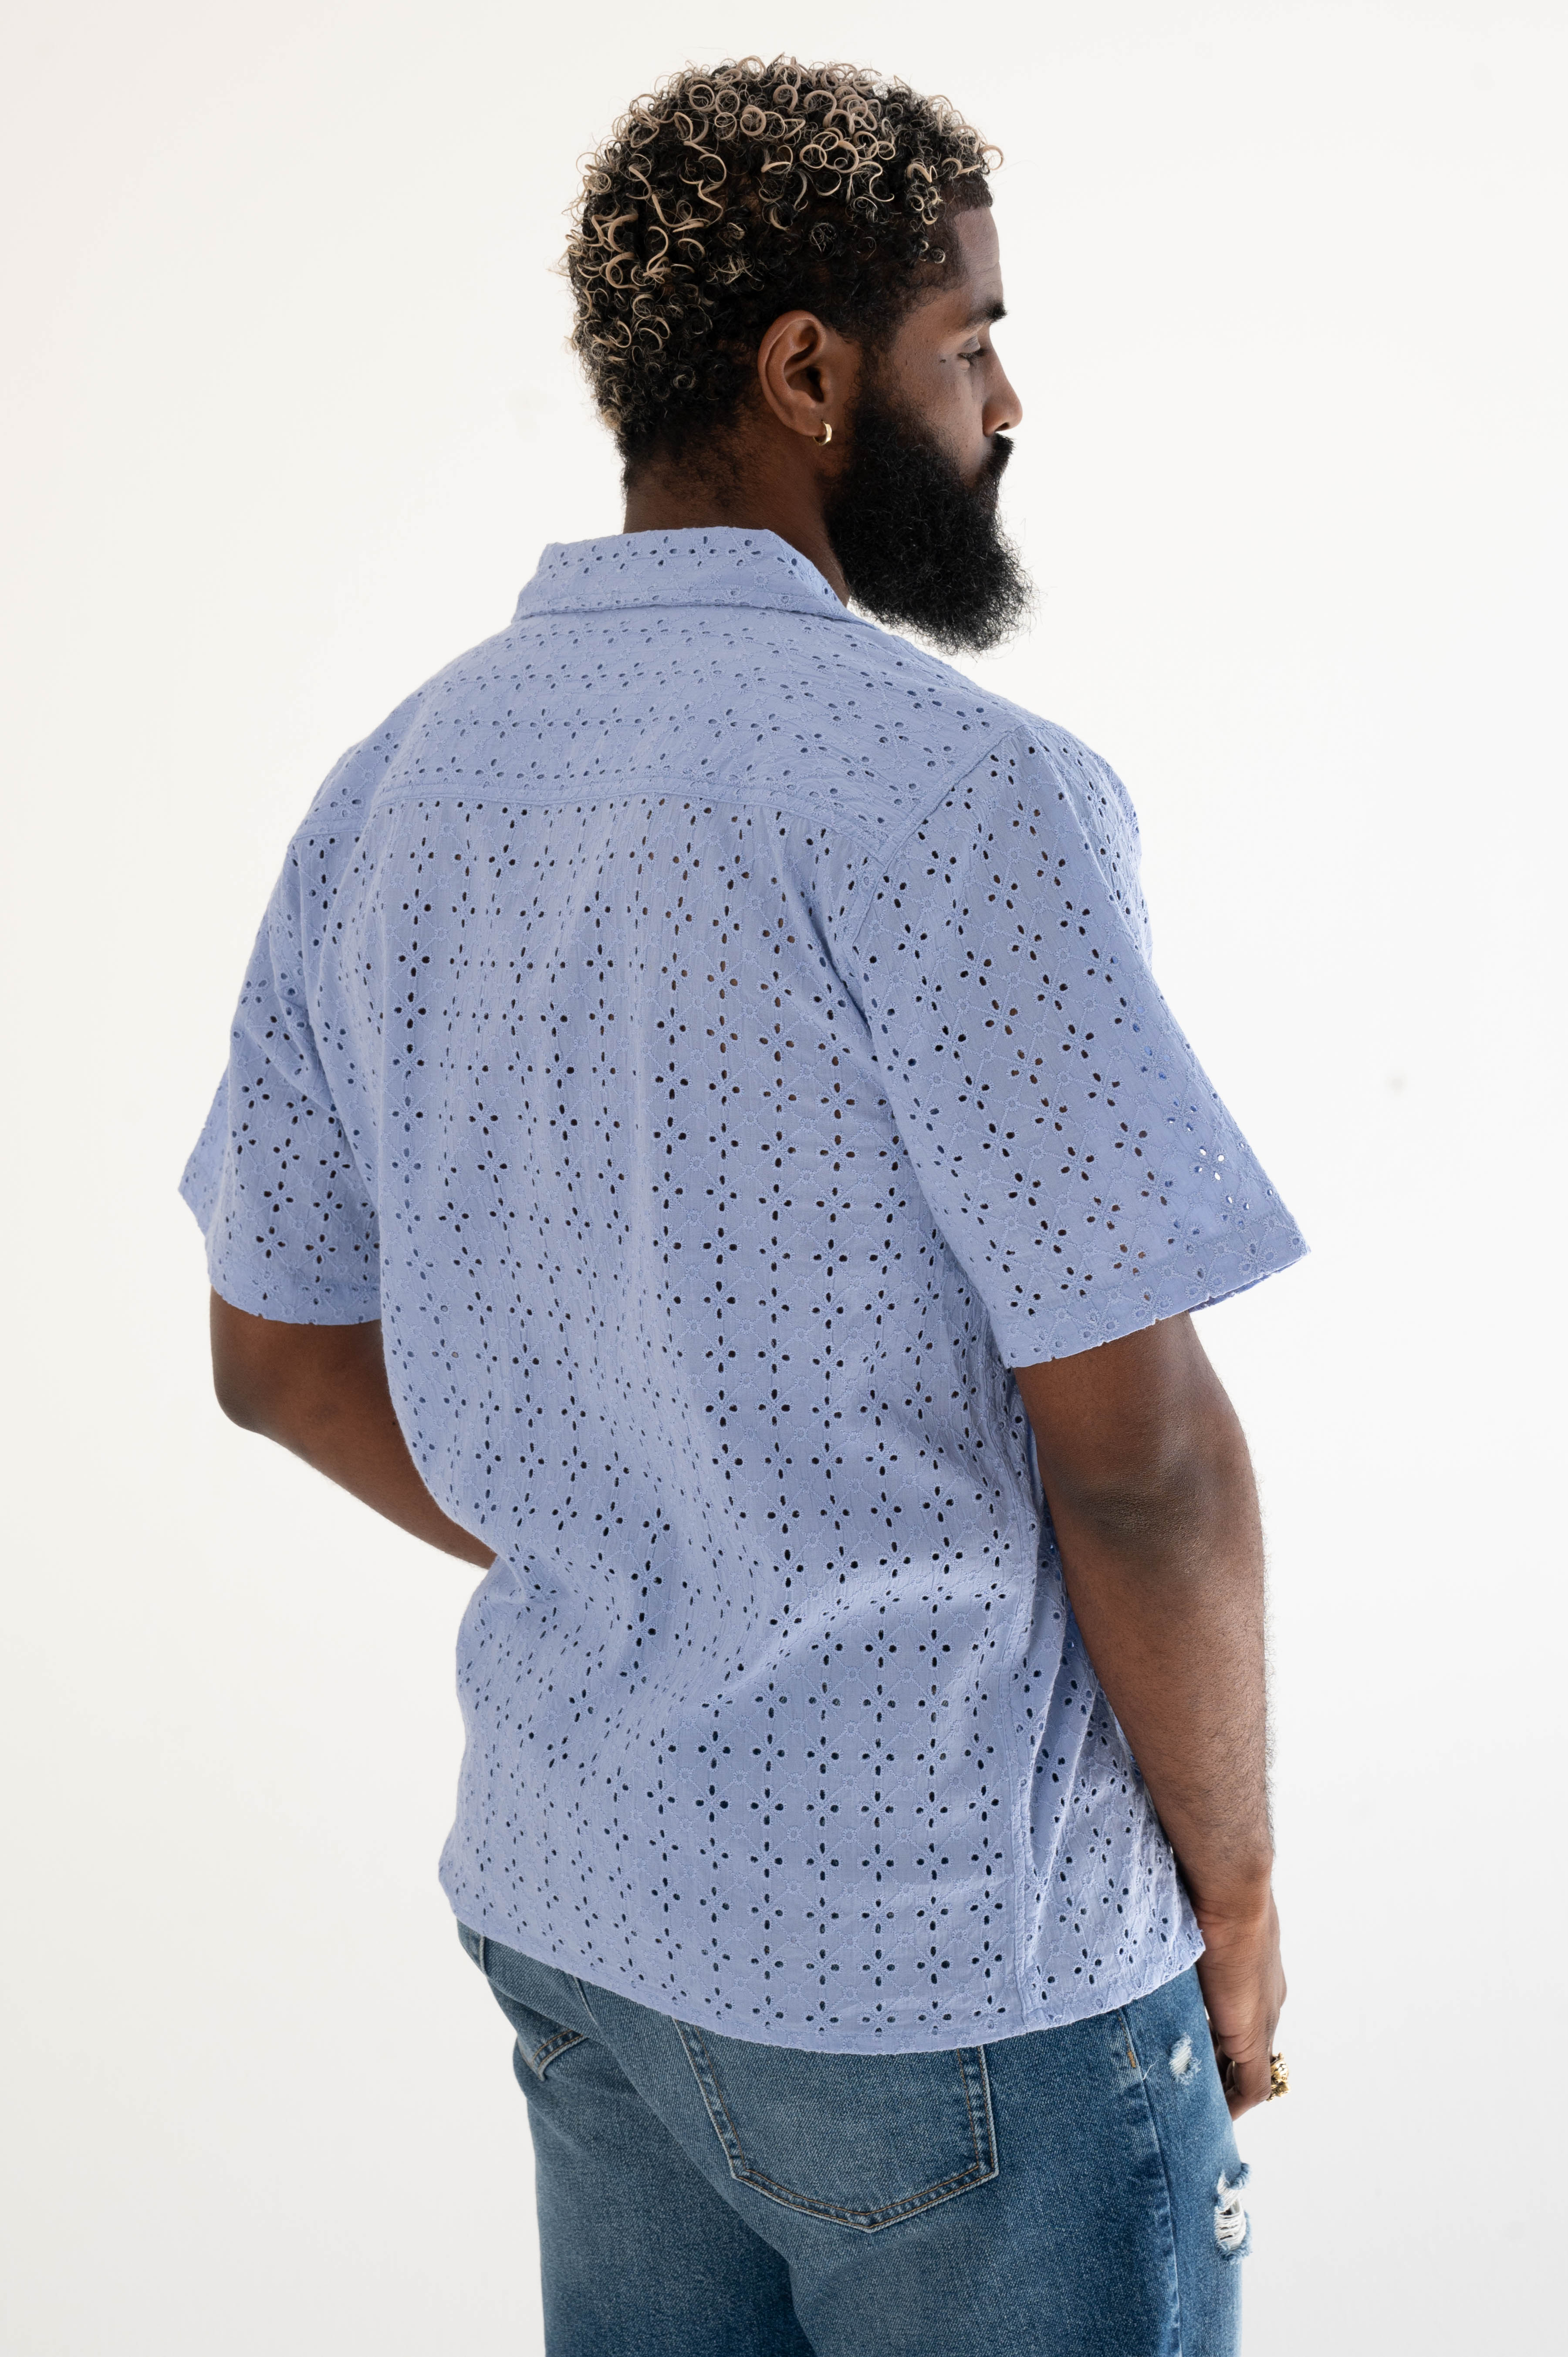 'The Don' Camp Collar Shirt in Periwinkle Blue Eyelet Fabric